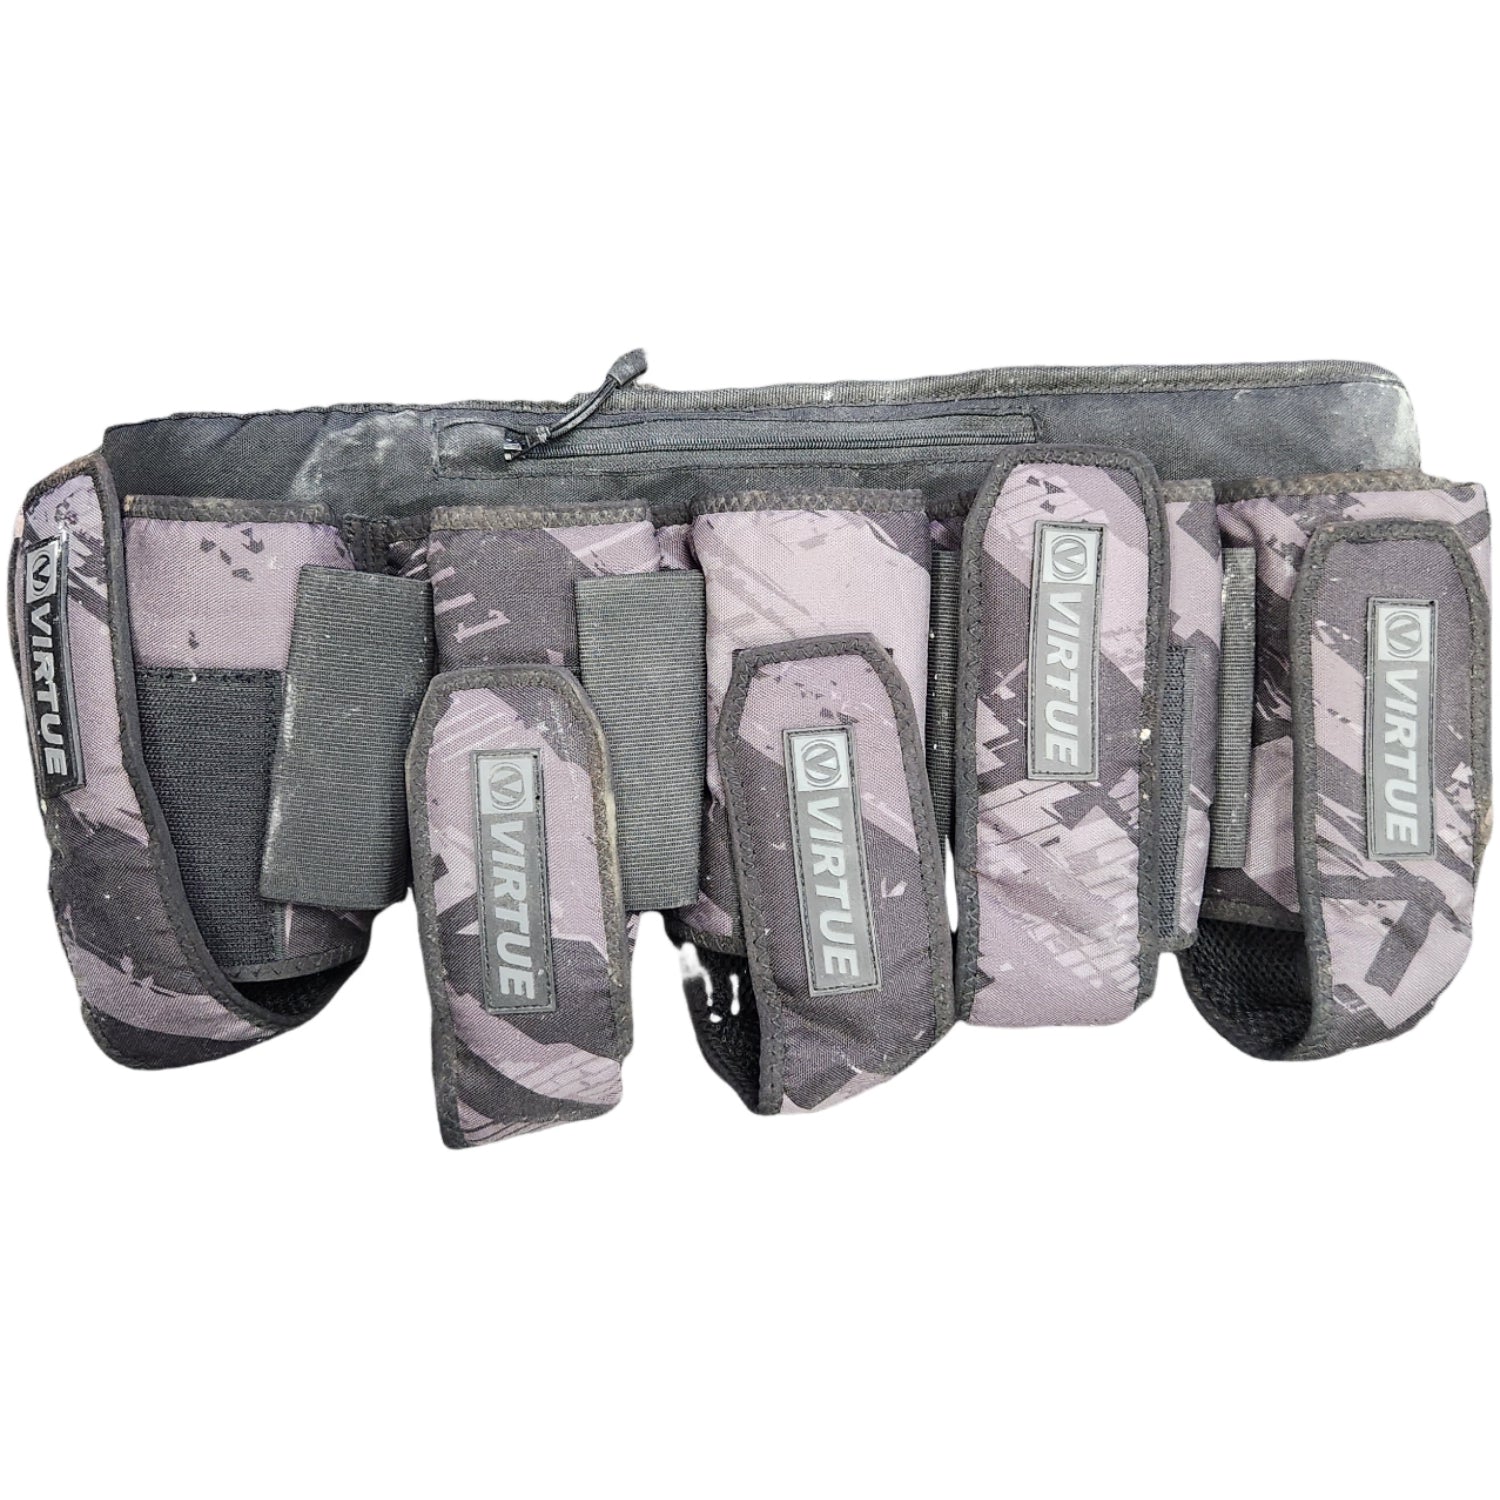 Virtue Strapped Pack 4+ - Black/Grey